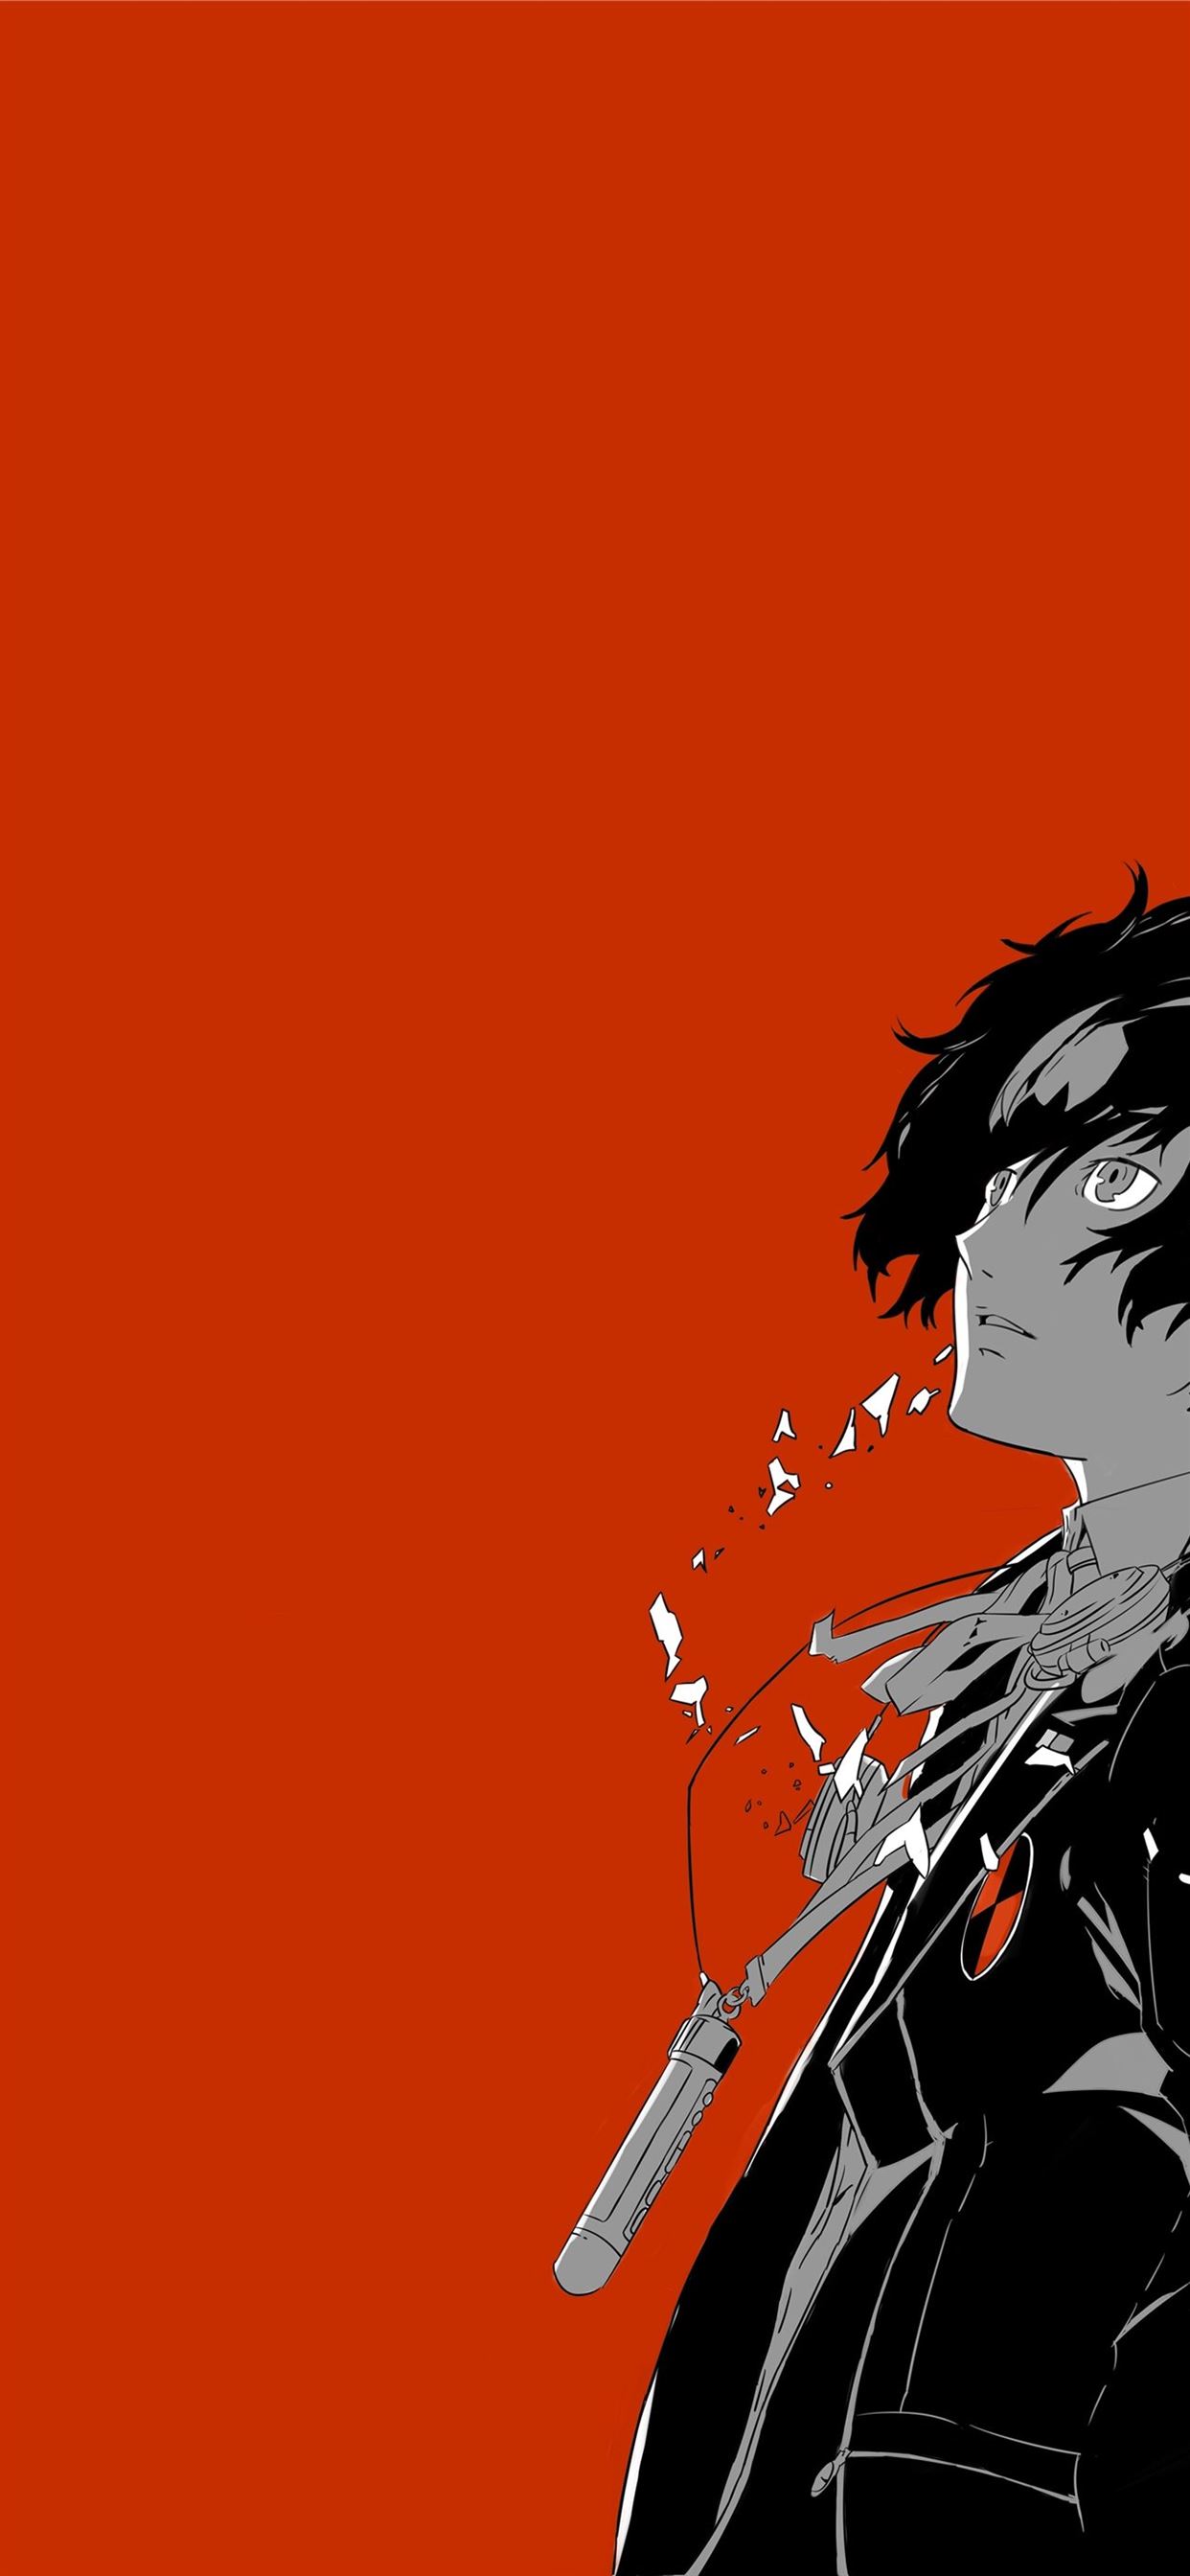 Persona 5 iPhone Wallpapers Free Download